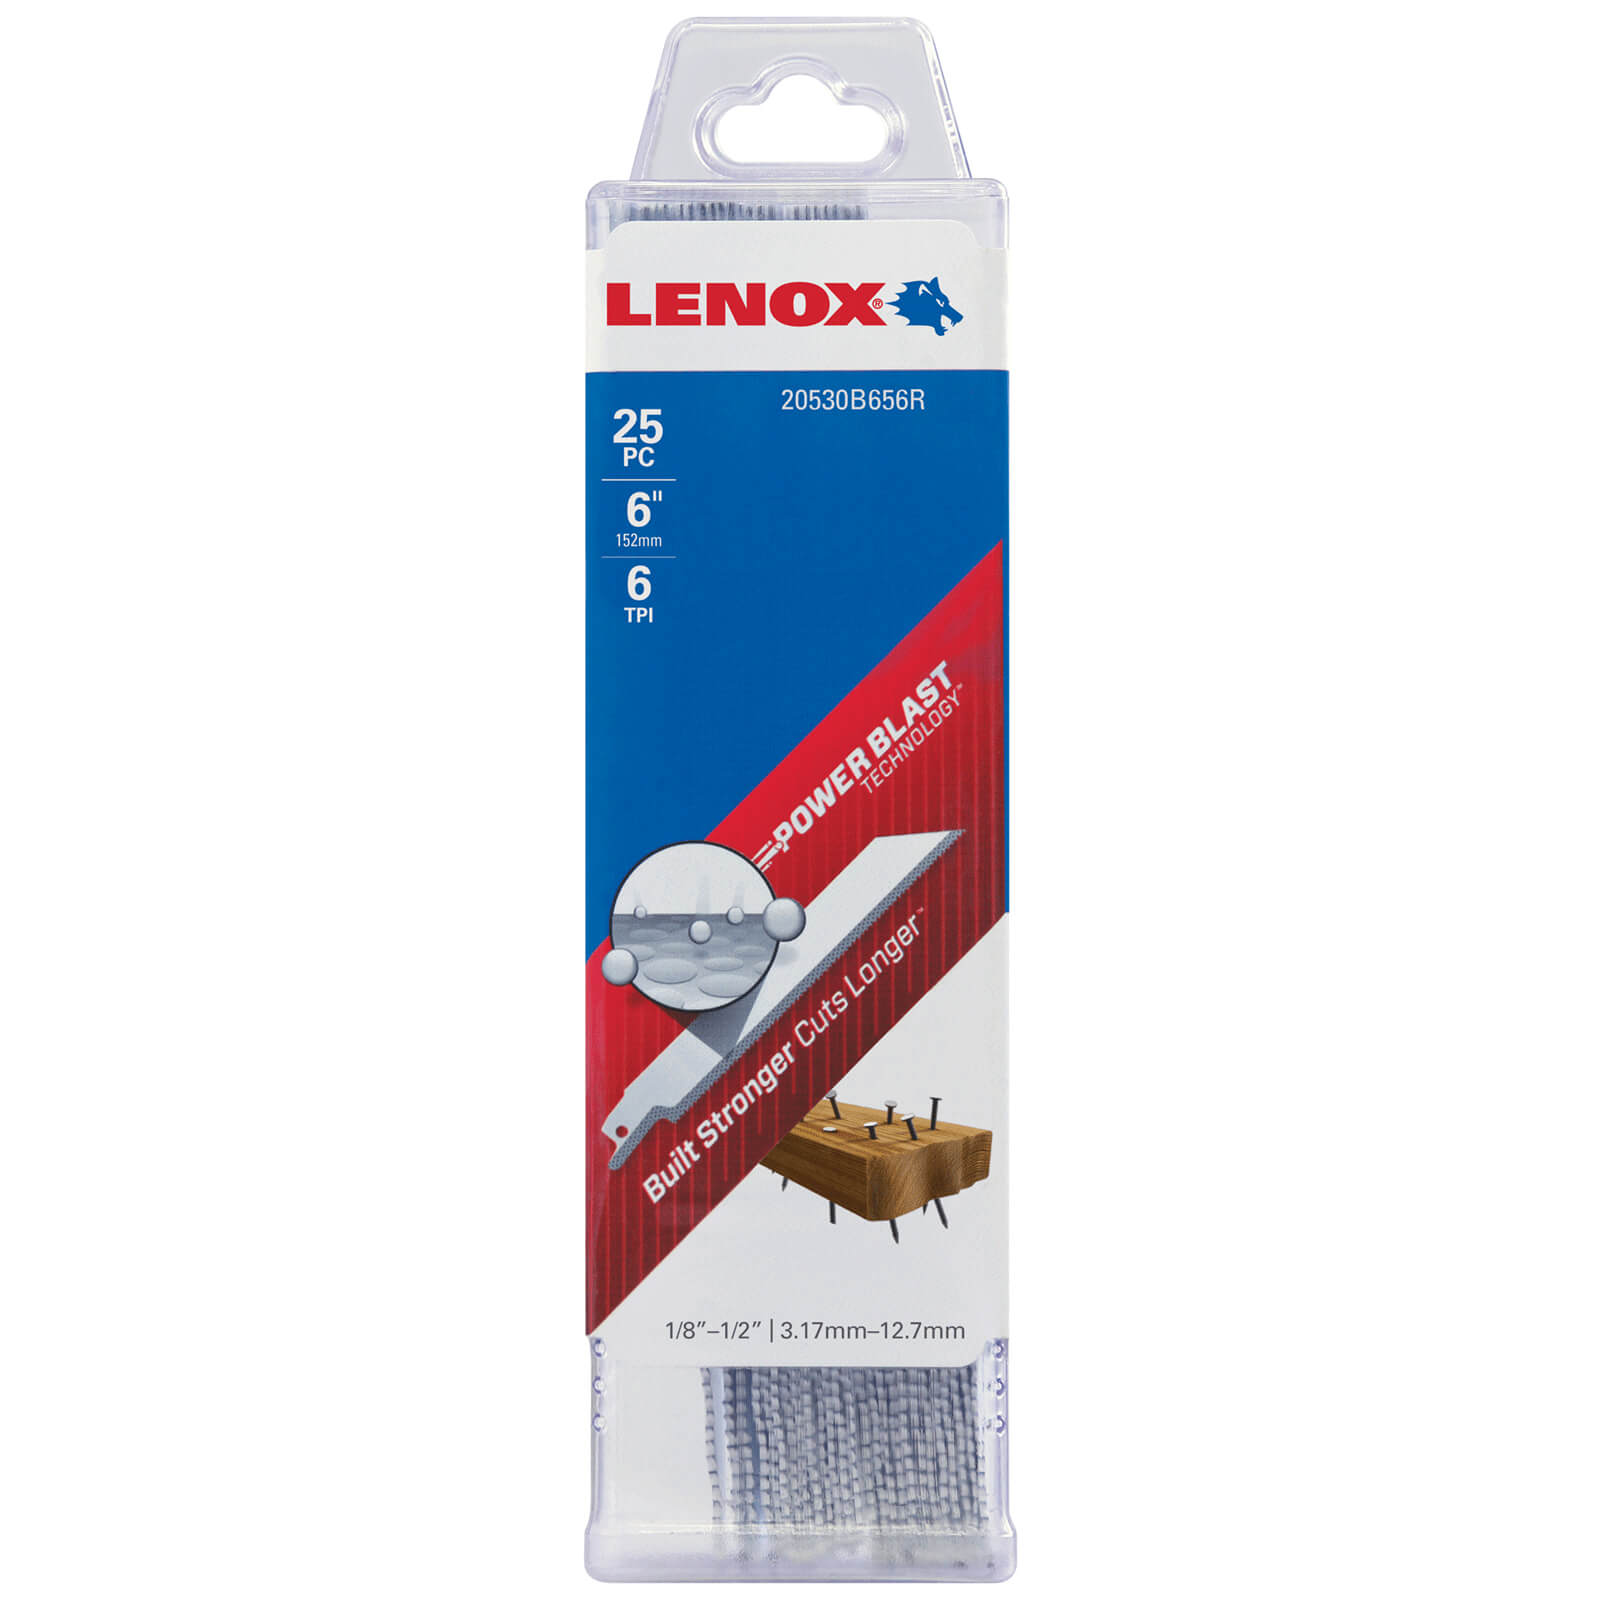 Image of Lenox 6TPI Nail Embedded Wood Cutting Reciprocating Sabre Saw Blades 152mm Pack of 25